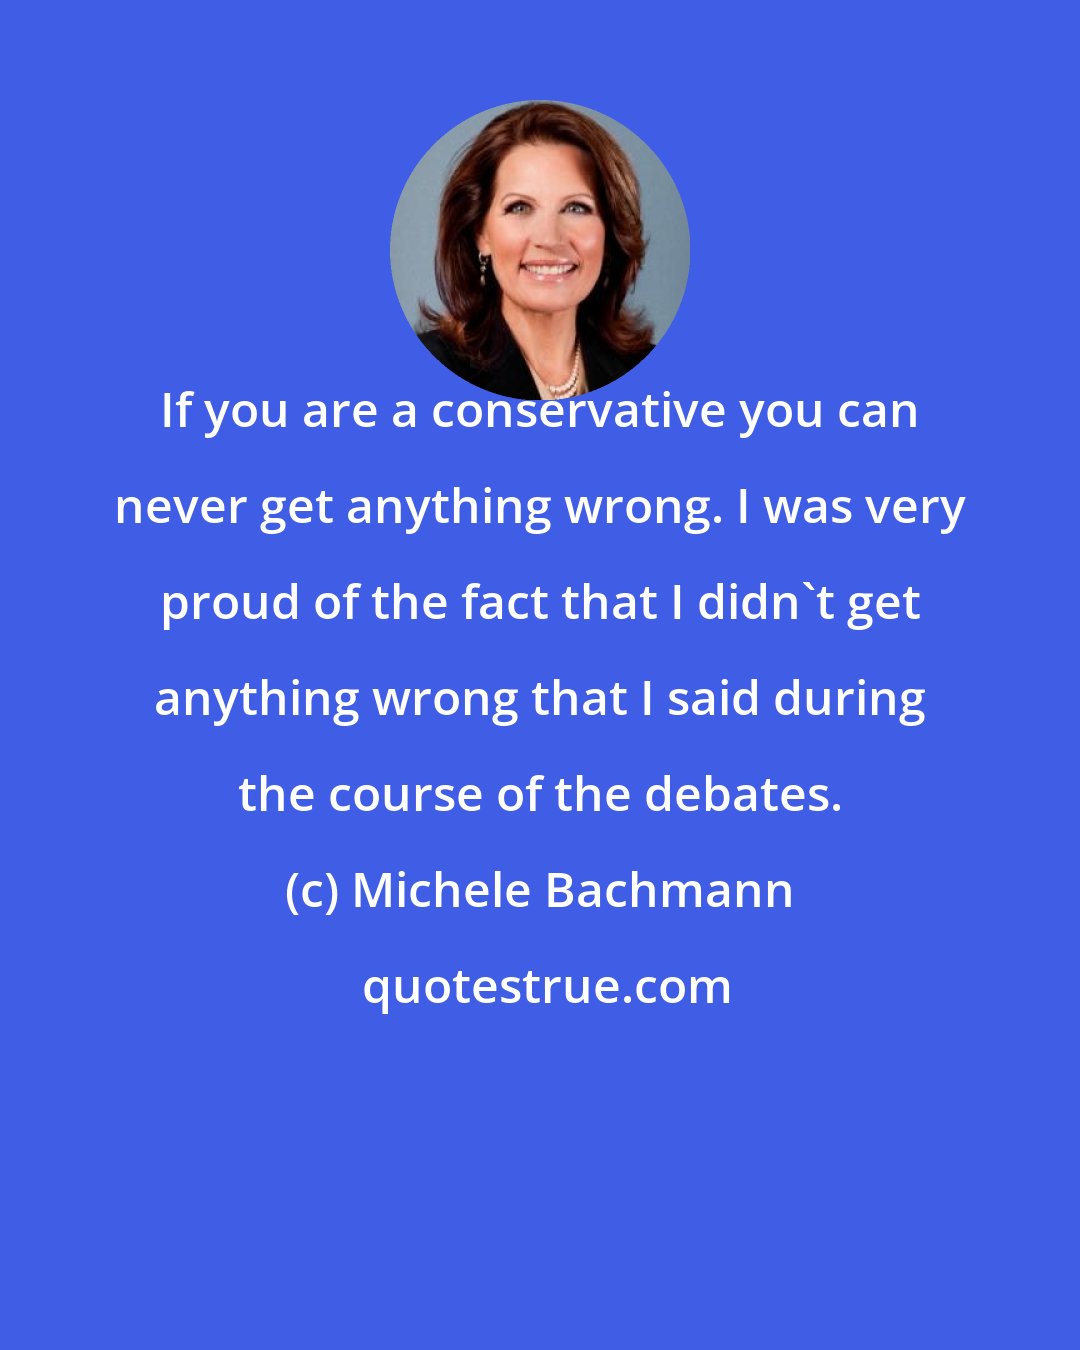 Michele Bachmann: If you are a conservative you can never get anything wrong. I was very proud of the fact that I didn't get anything wrong that I said during the course of the debates.